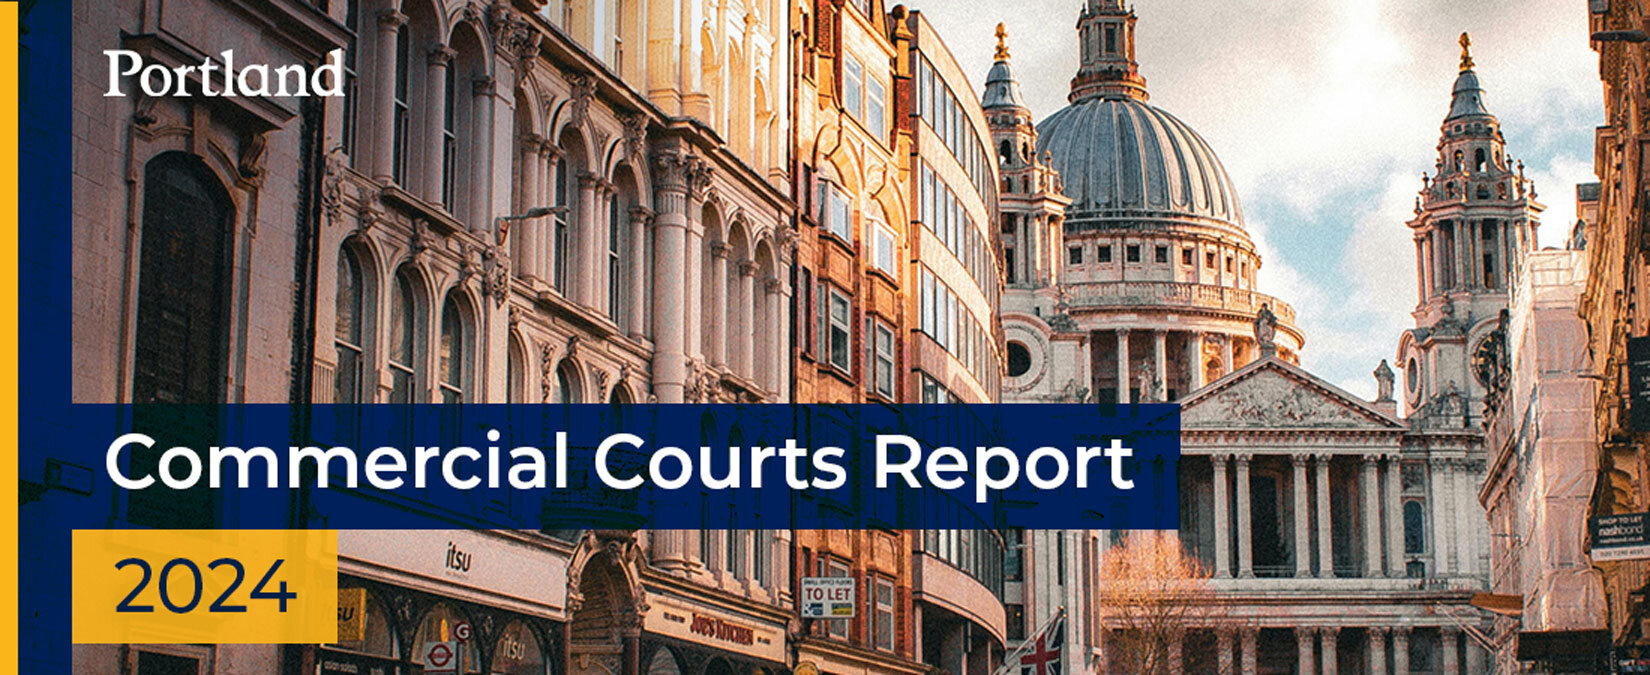 Commercial Courts Report 2024